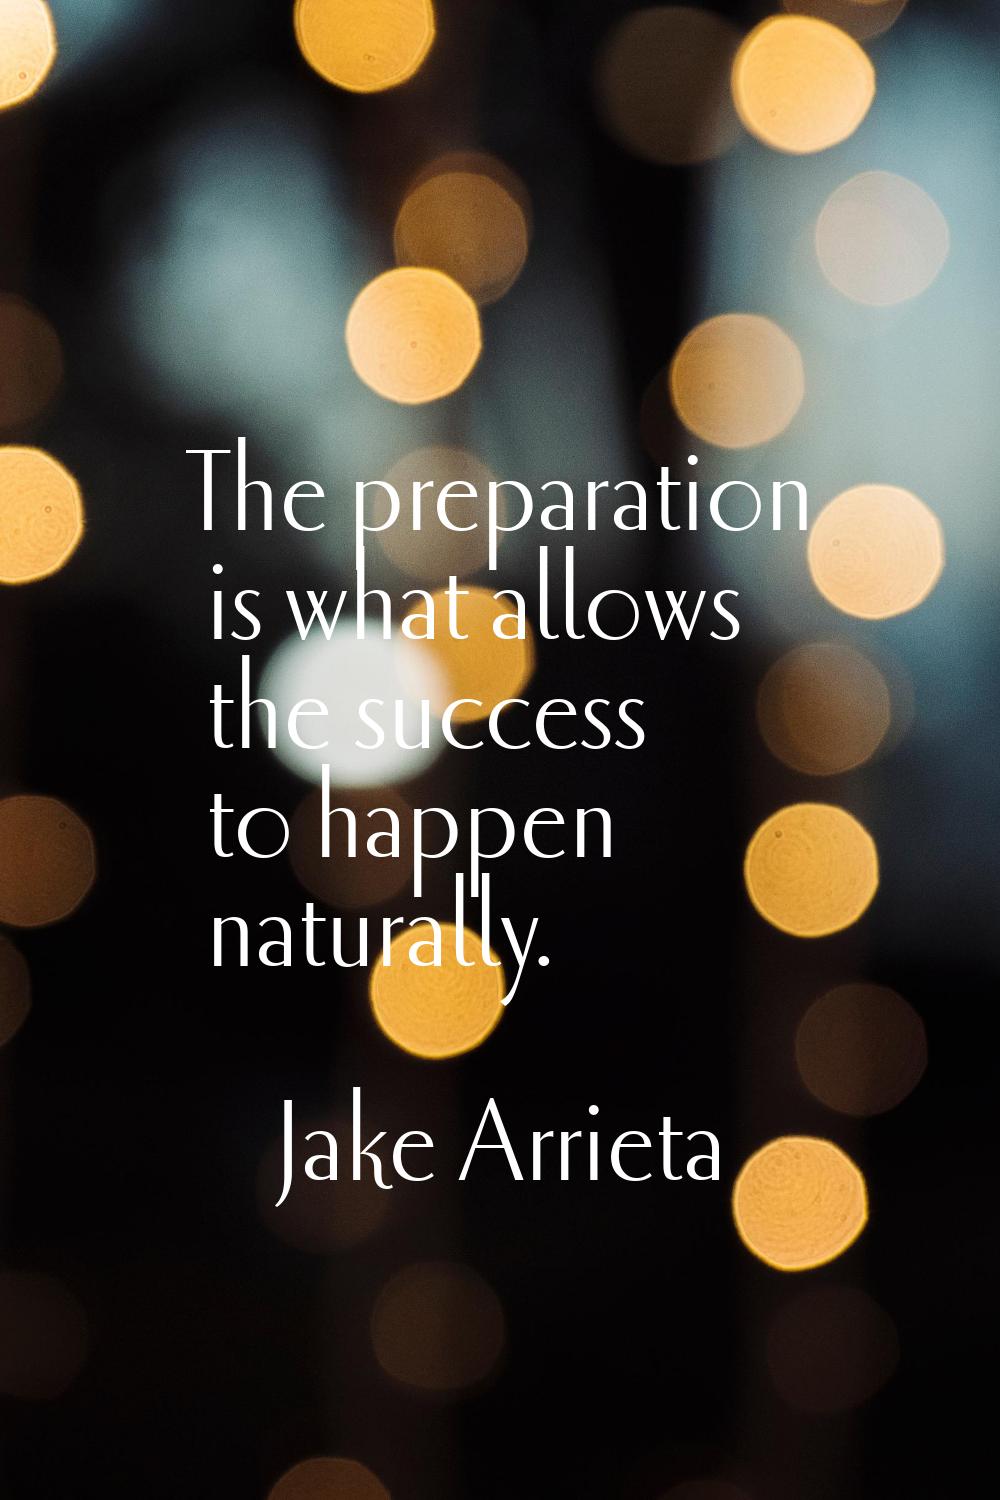 The preparation is what allows the success to happen naturally.